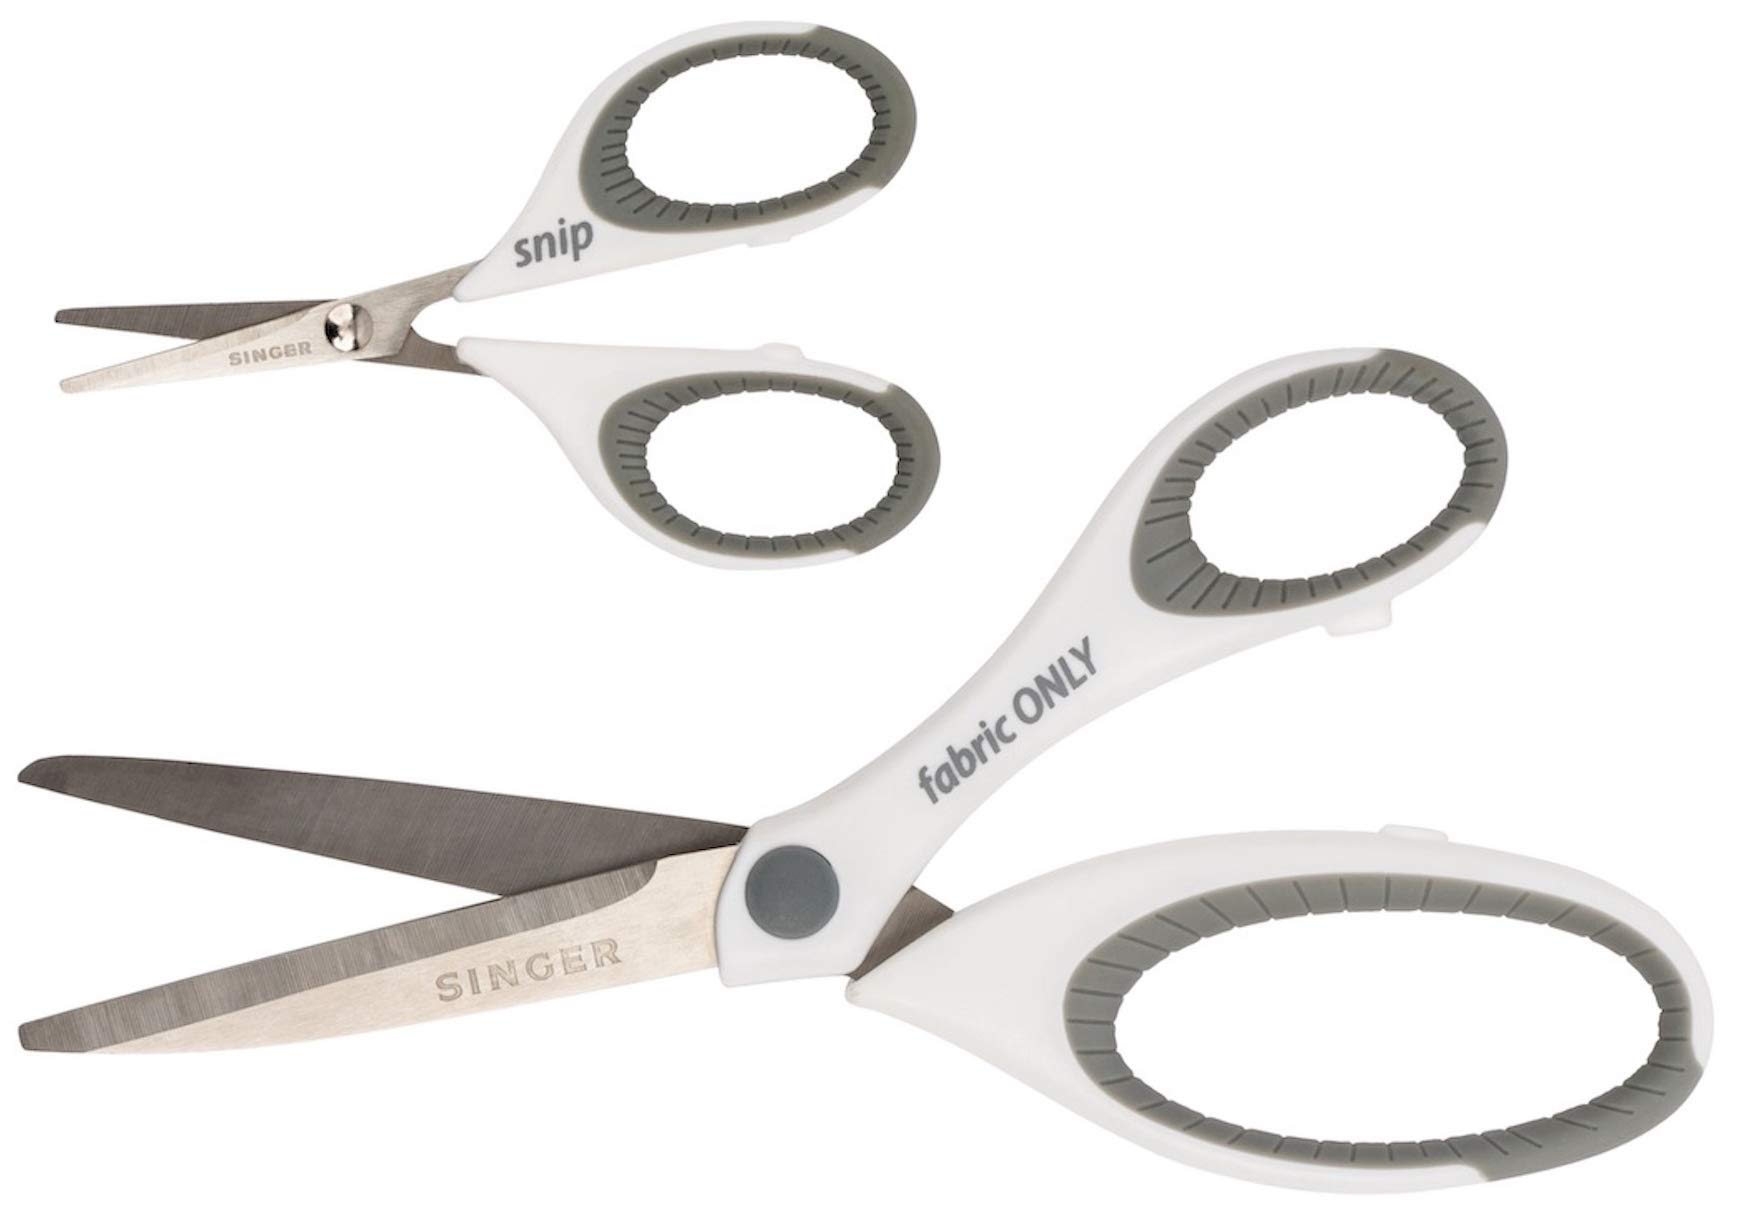 SINGER 07175 Sewing and Detail Scissors Set with Comfort Grip,White,pink